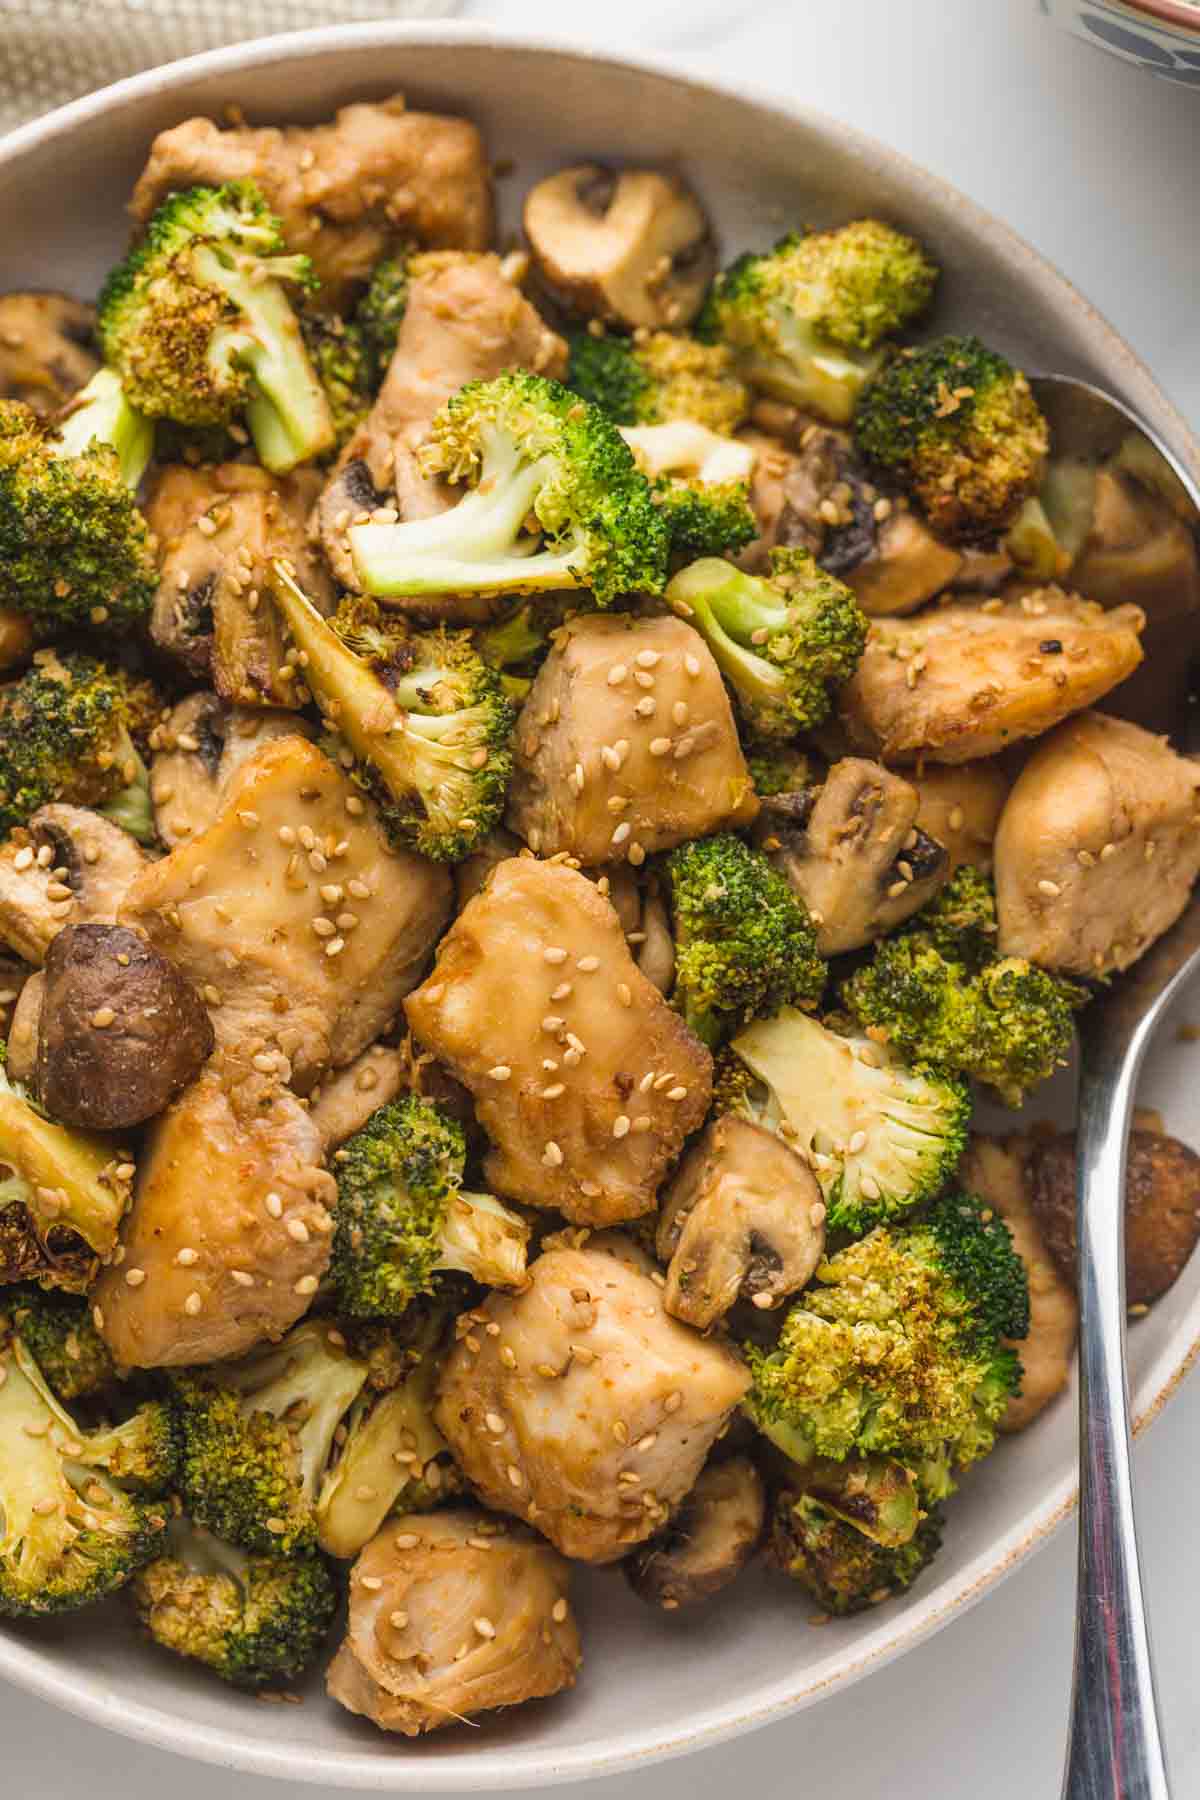 Chinese chicken and broccoli served in a beige bowl with a spoon